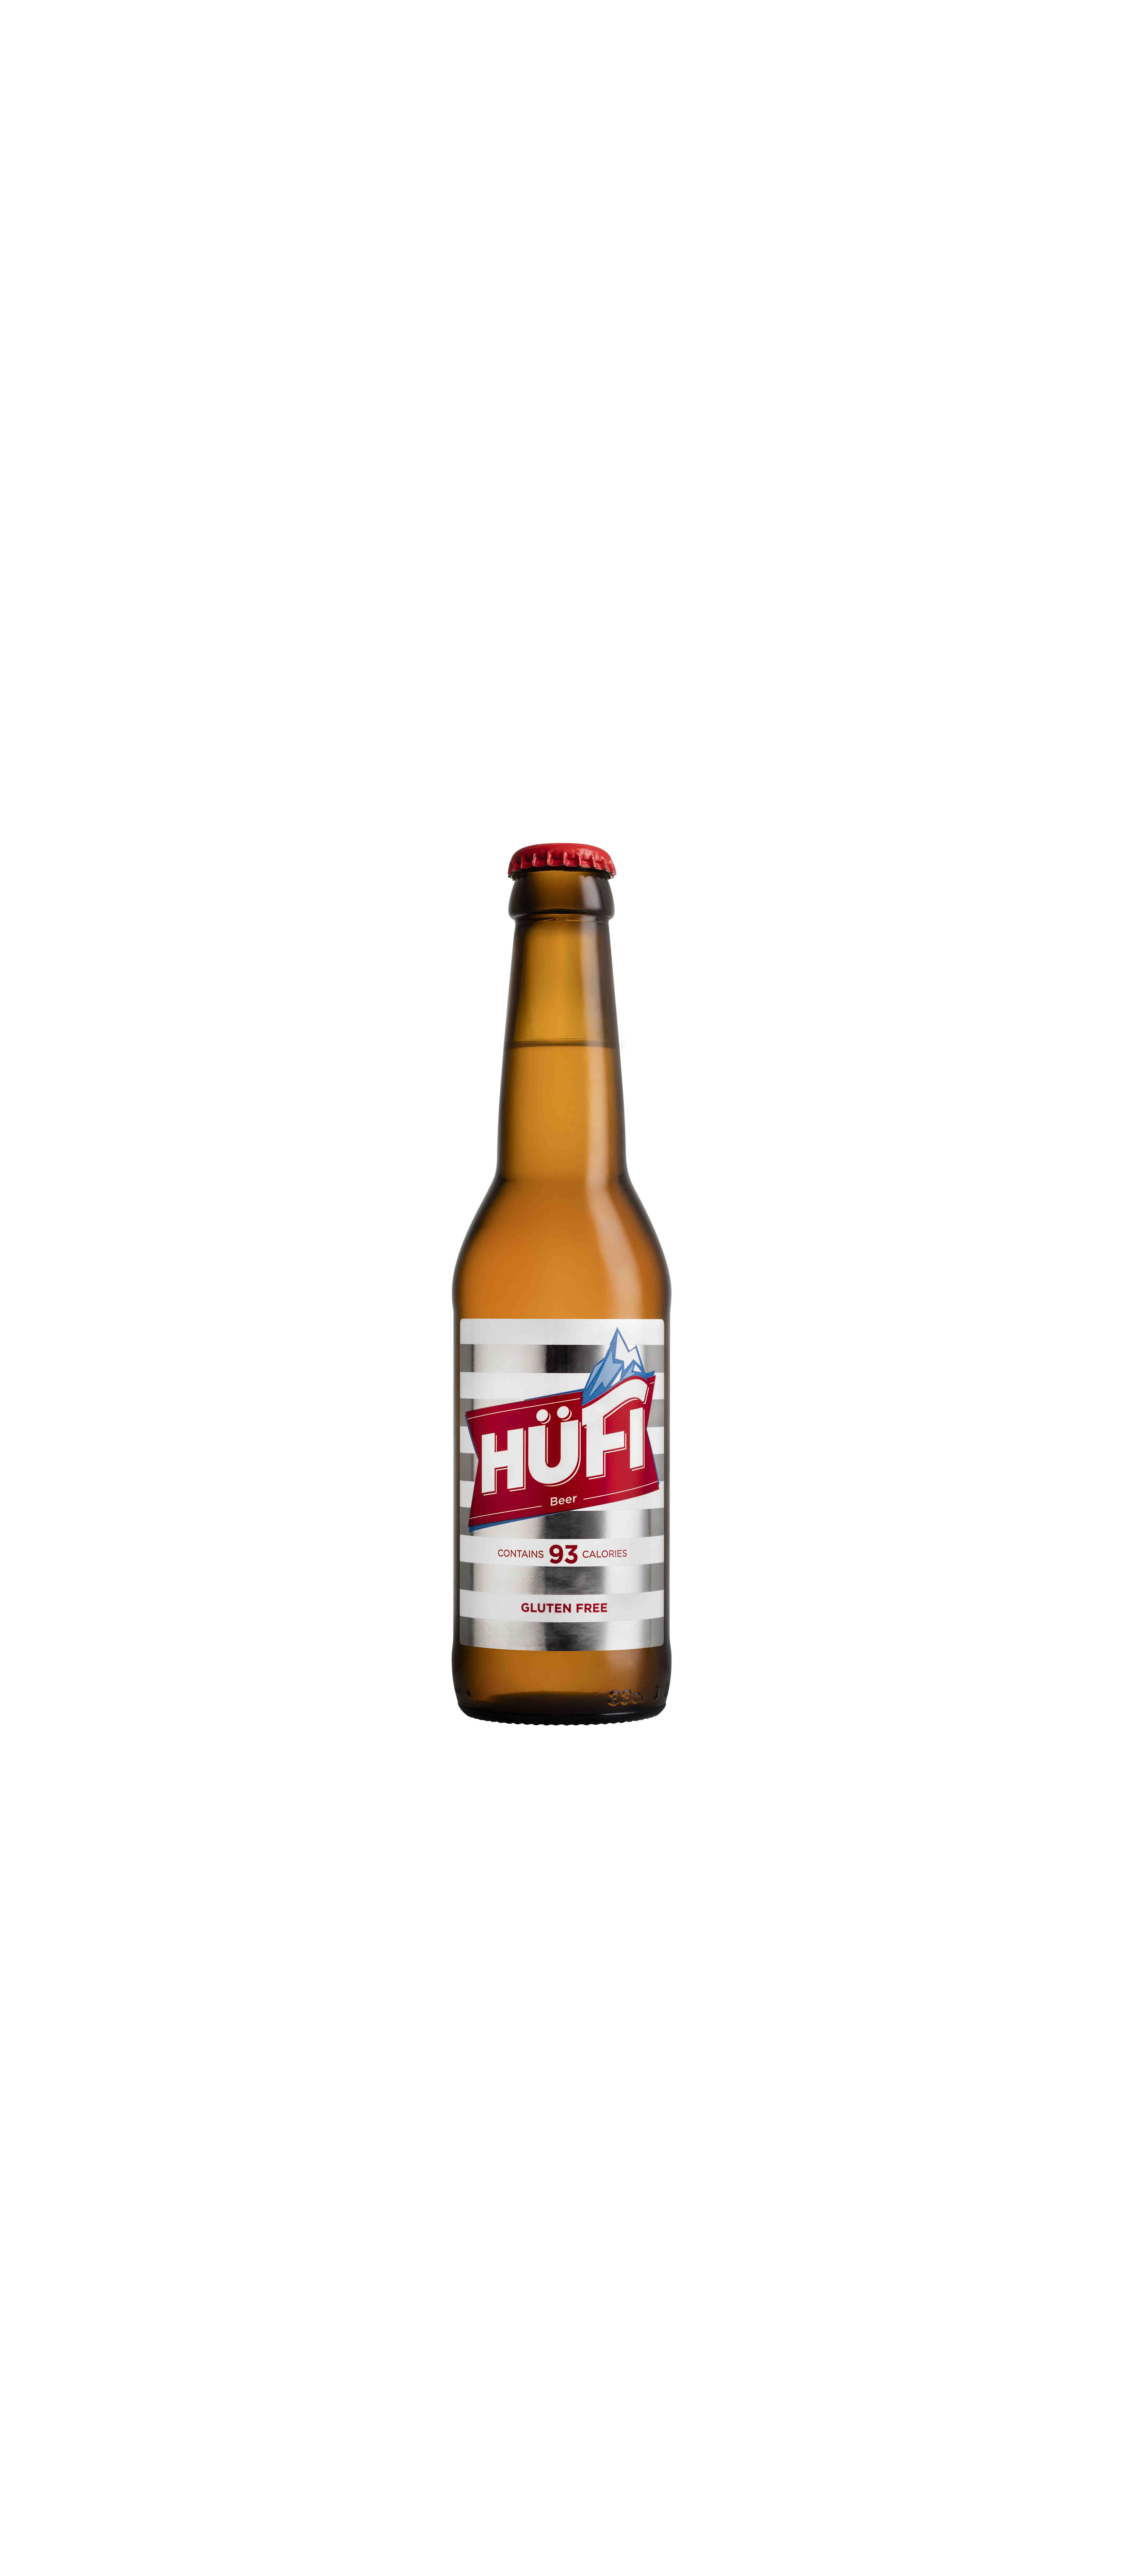 Hüfi - now available to the on-trade via Comans Wholesale.